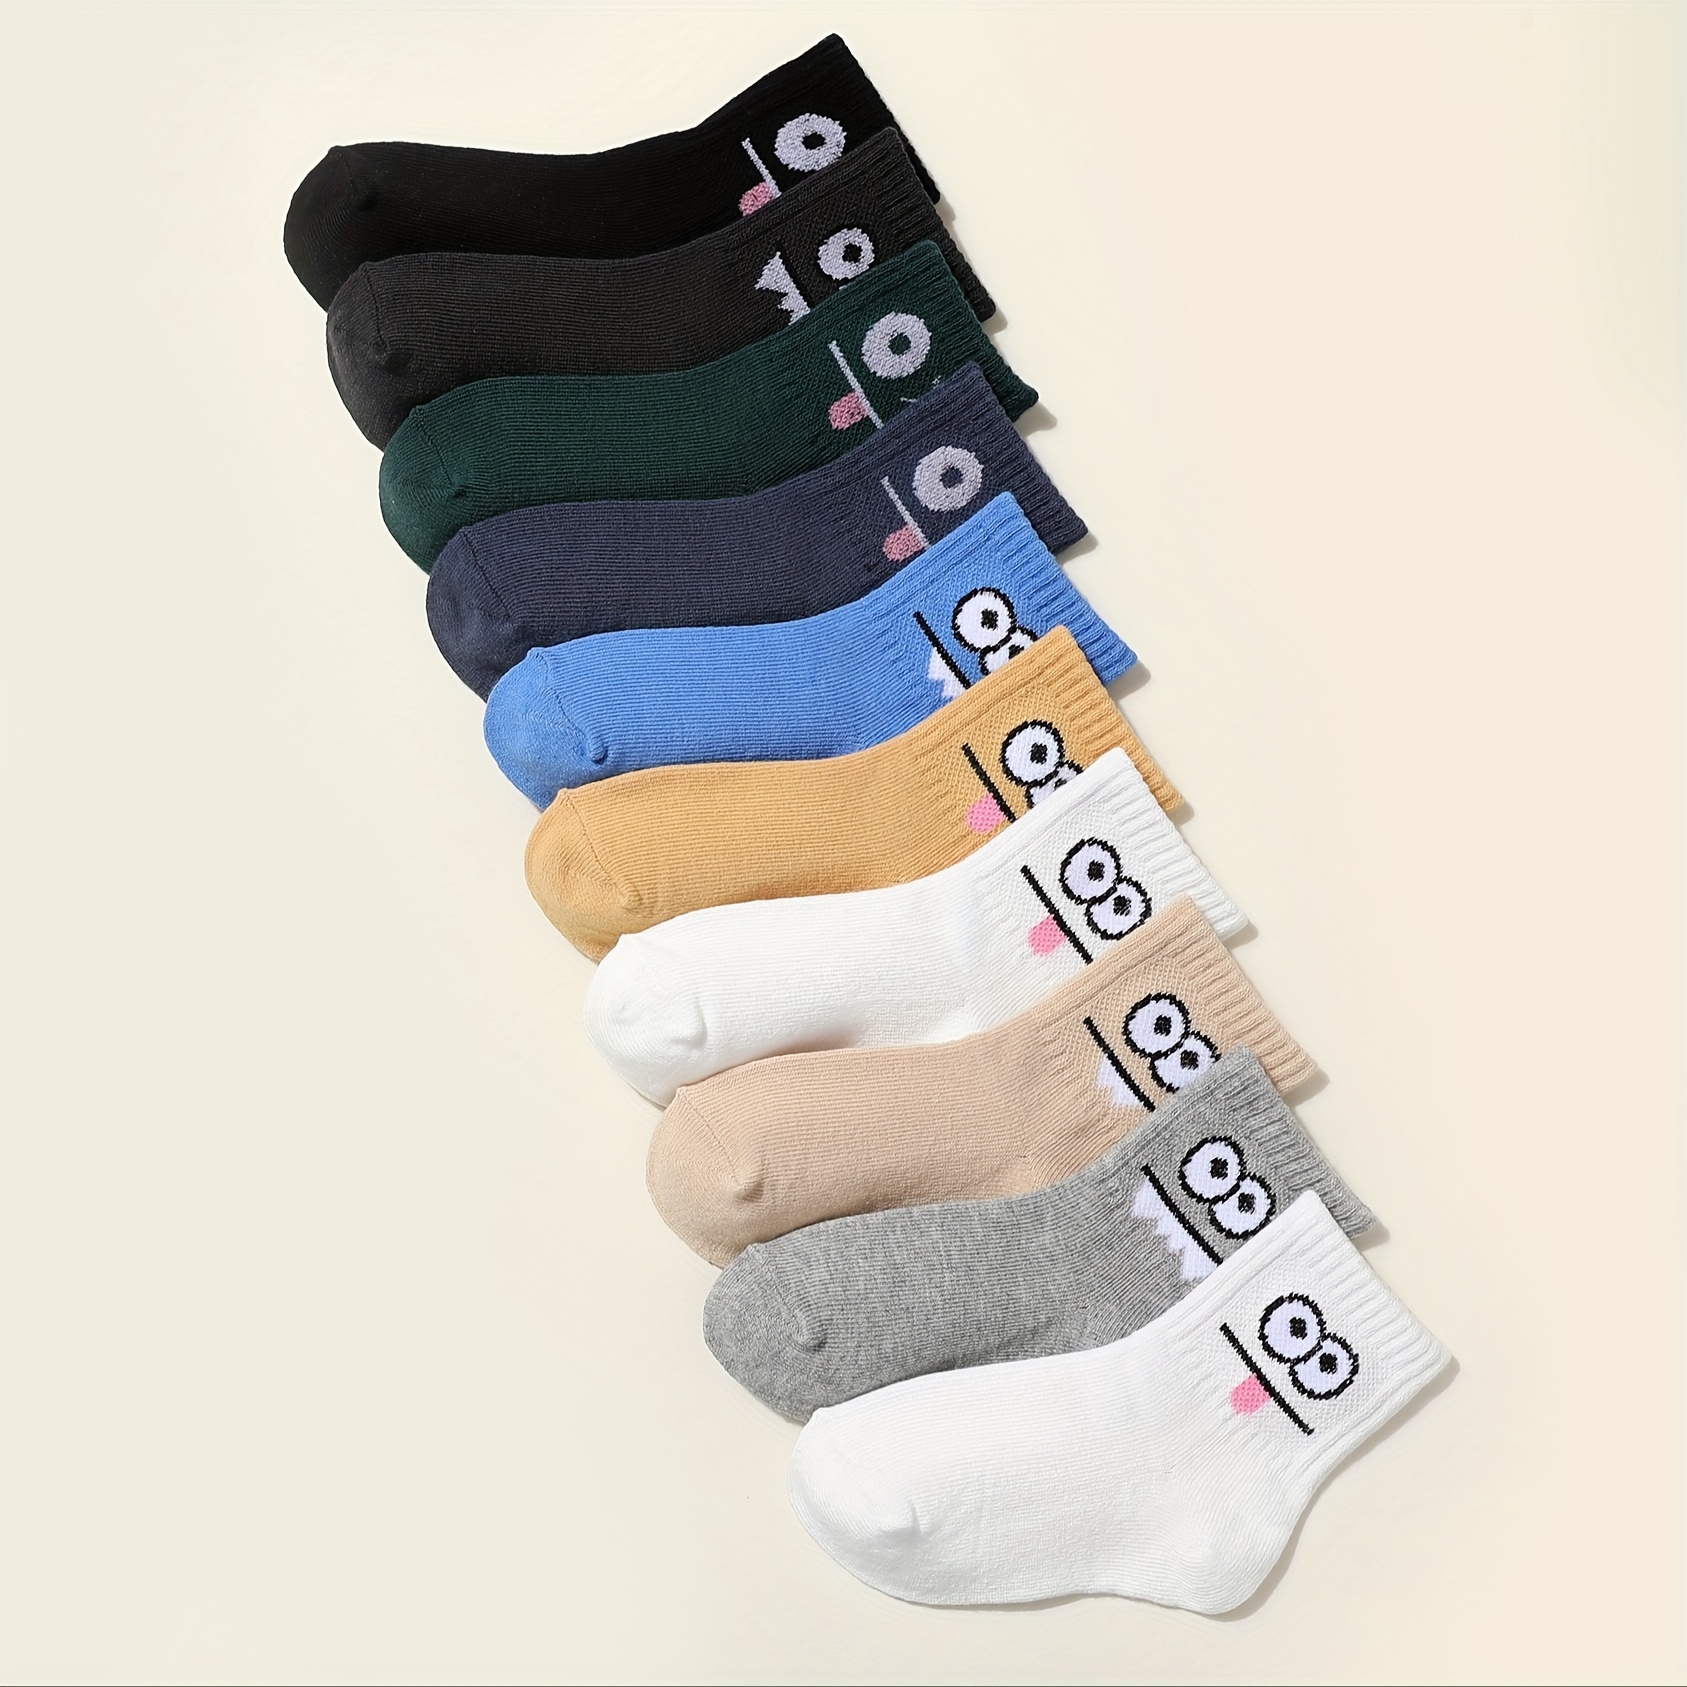 

5 Or 10 Pairs Of Kid's Cotton Blend Fashion Cute Pattern Crew Socks, Comfy & Breathable Soft & Elastic Socks For All Seasons Wearing